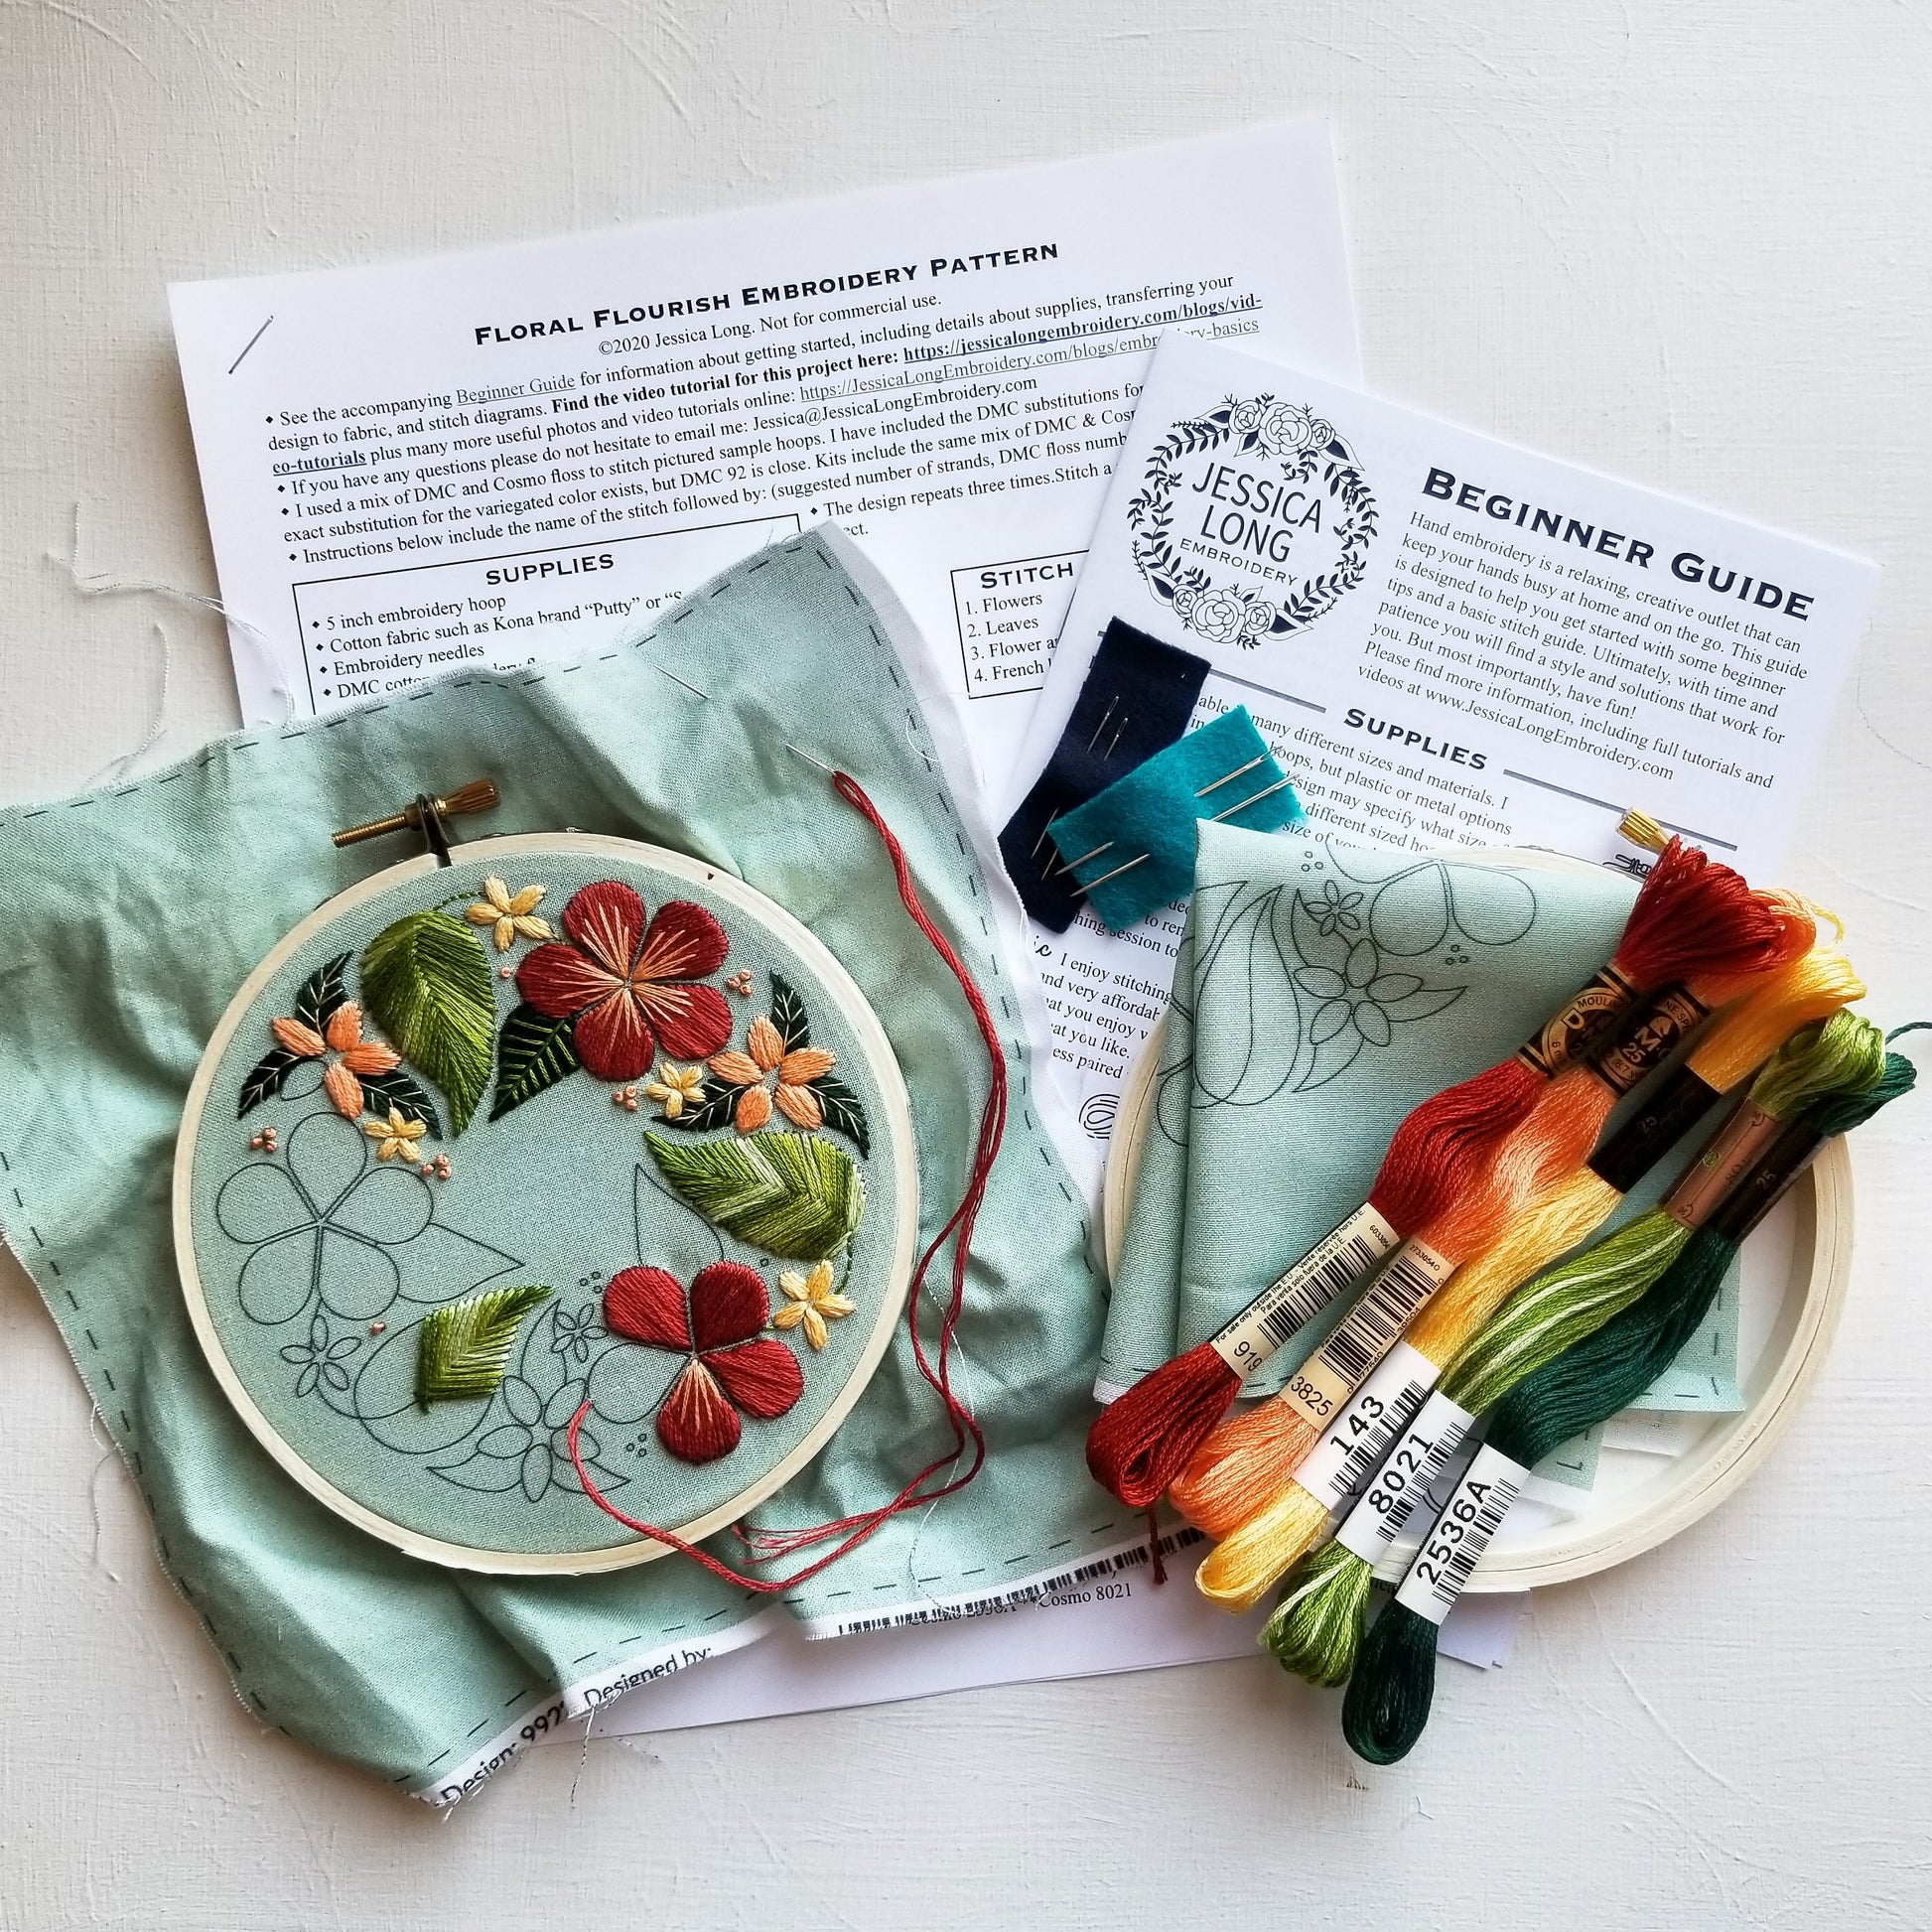 Jessica Long Embroidery Kit Floral Harvest - The Websters